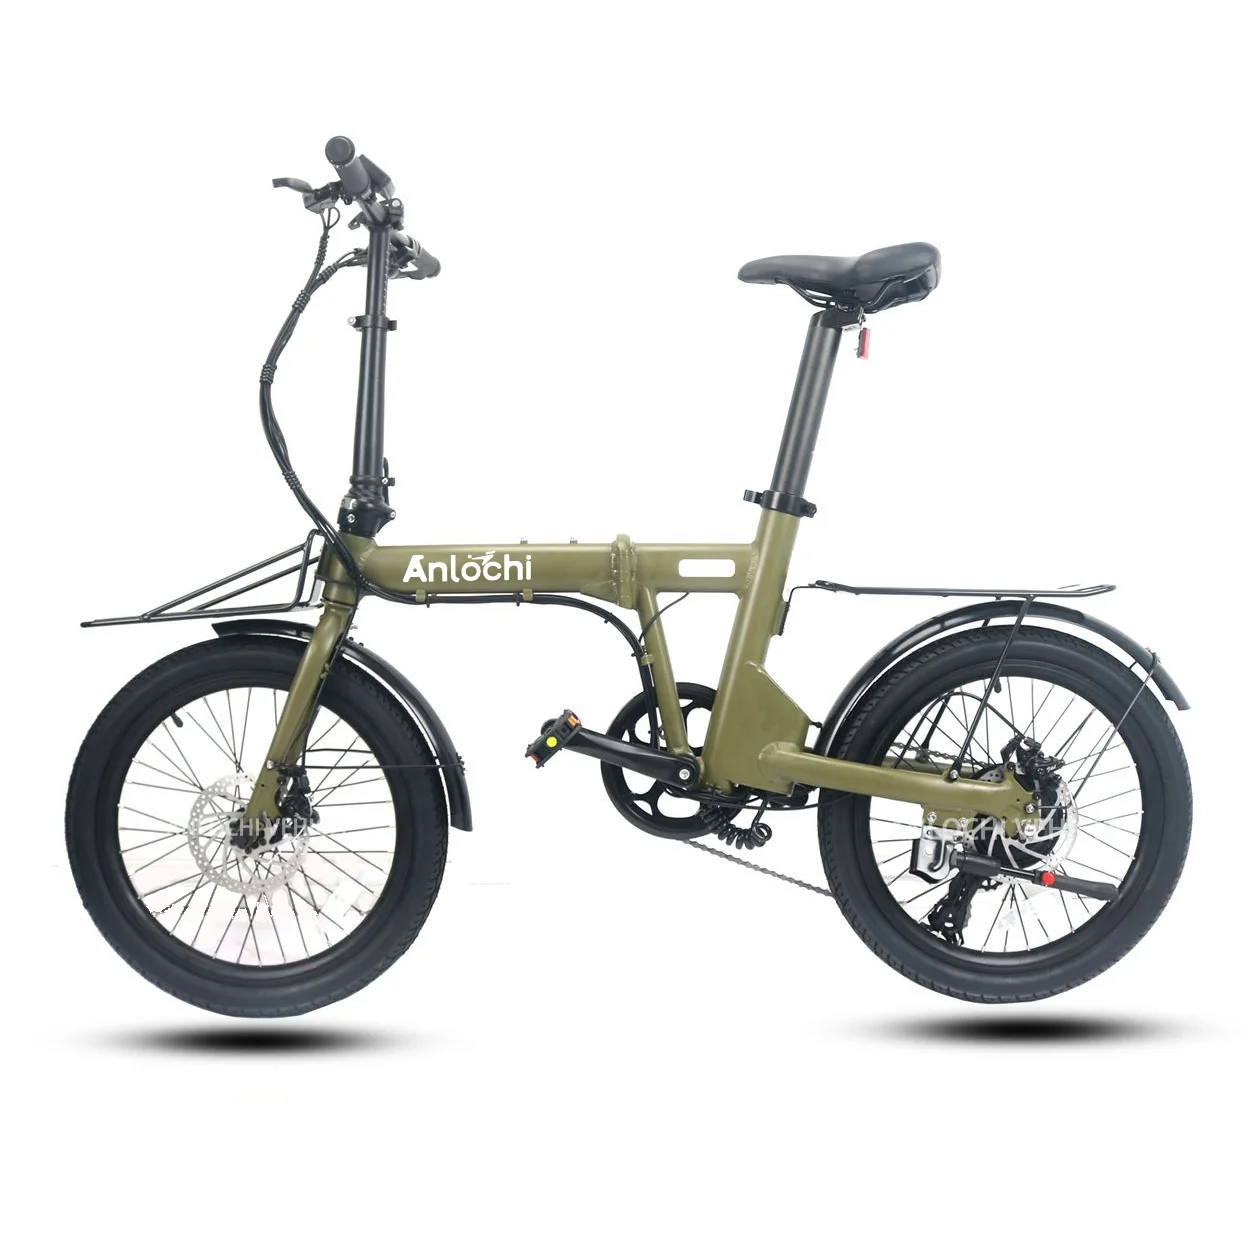 

ANLOCHI Chinese brand customized seatpost battery cycle 20 inch 250W pedal assist electric folding bicycle e bike